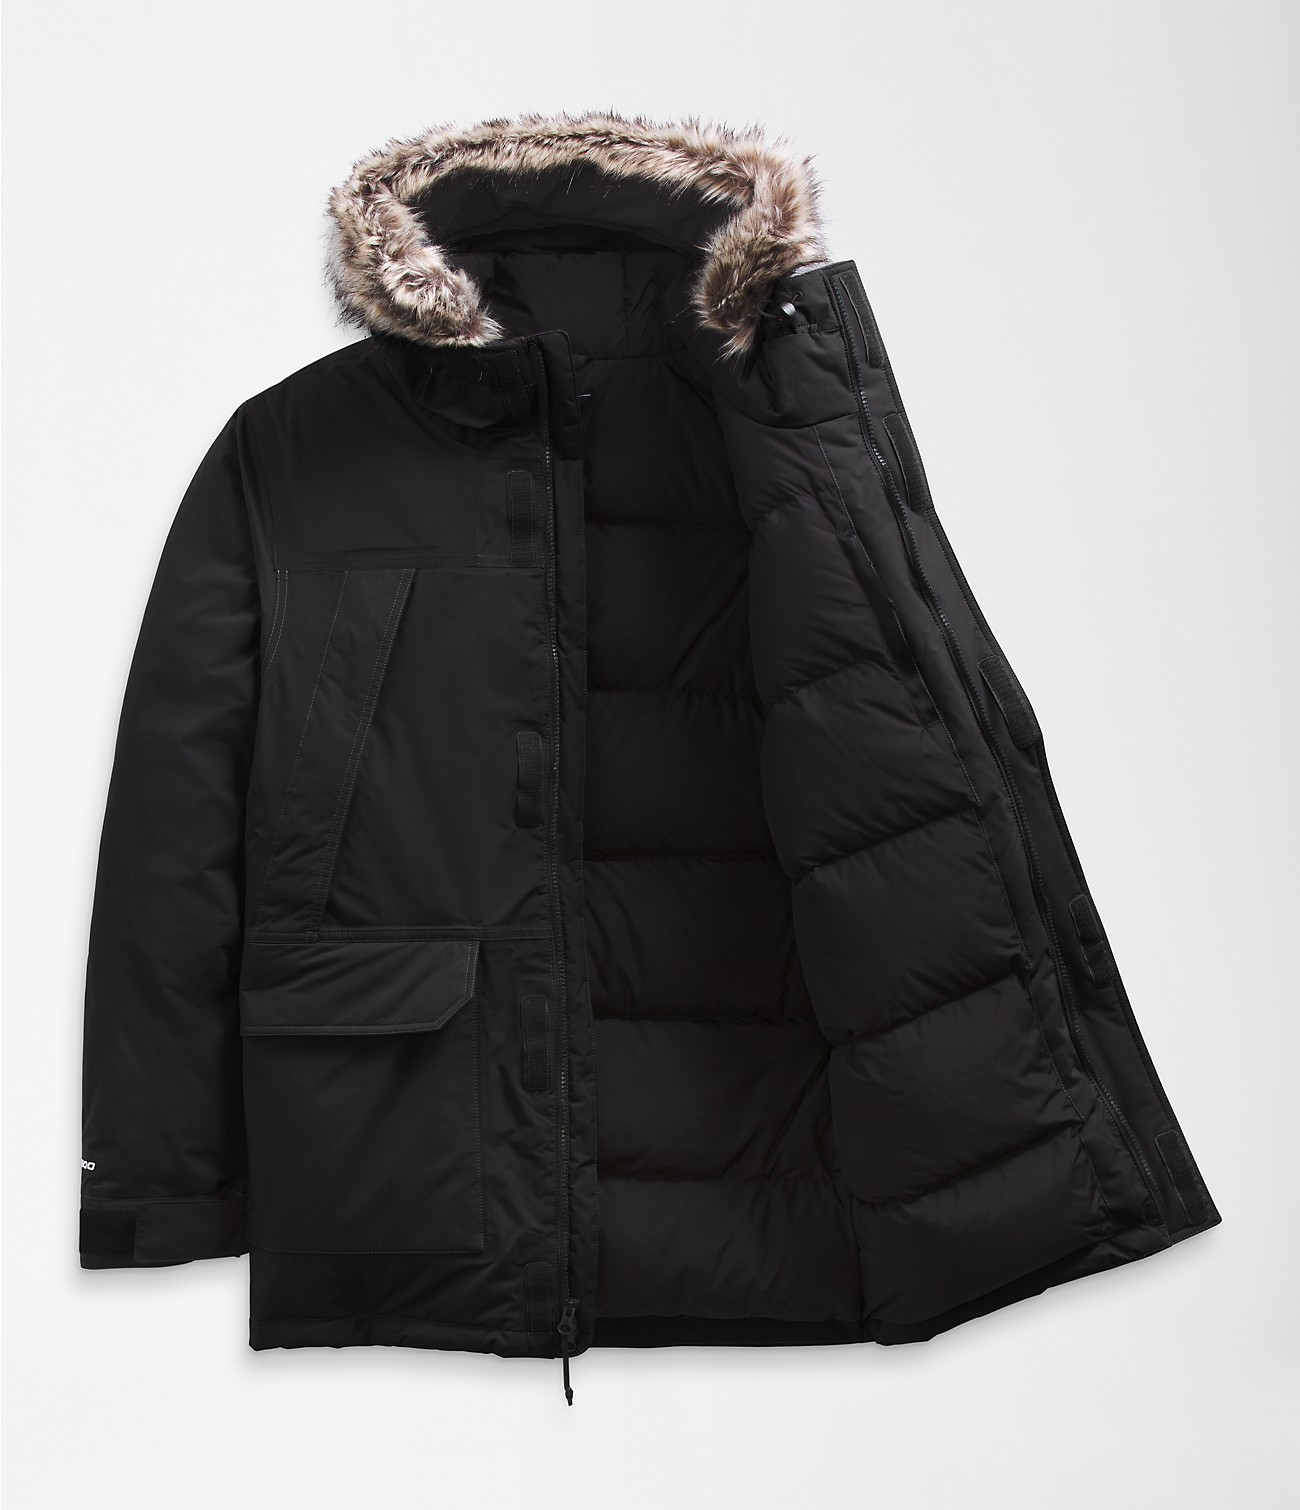 Unlock Wilderness' choice in the Columbia Vs North Face comparison, the McMurdo Parka by The North Face